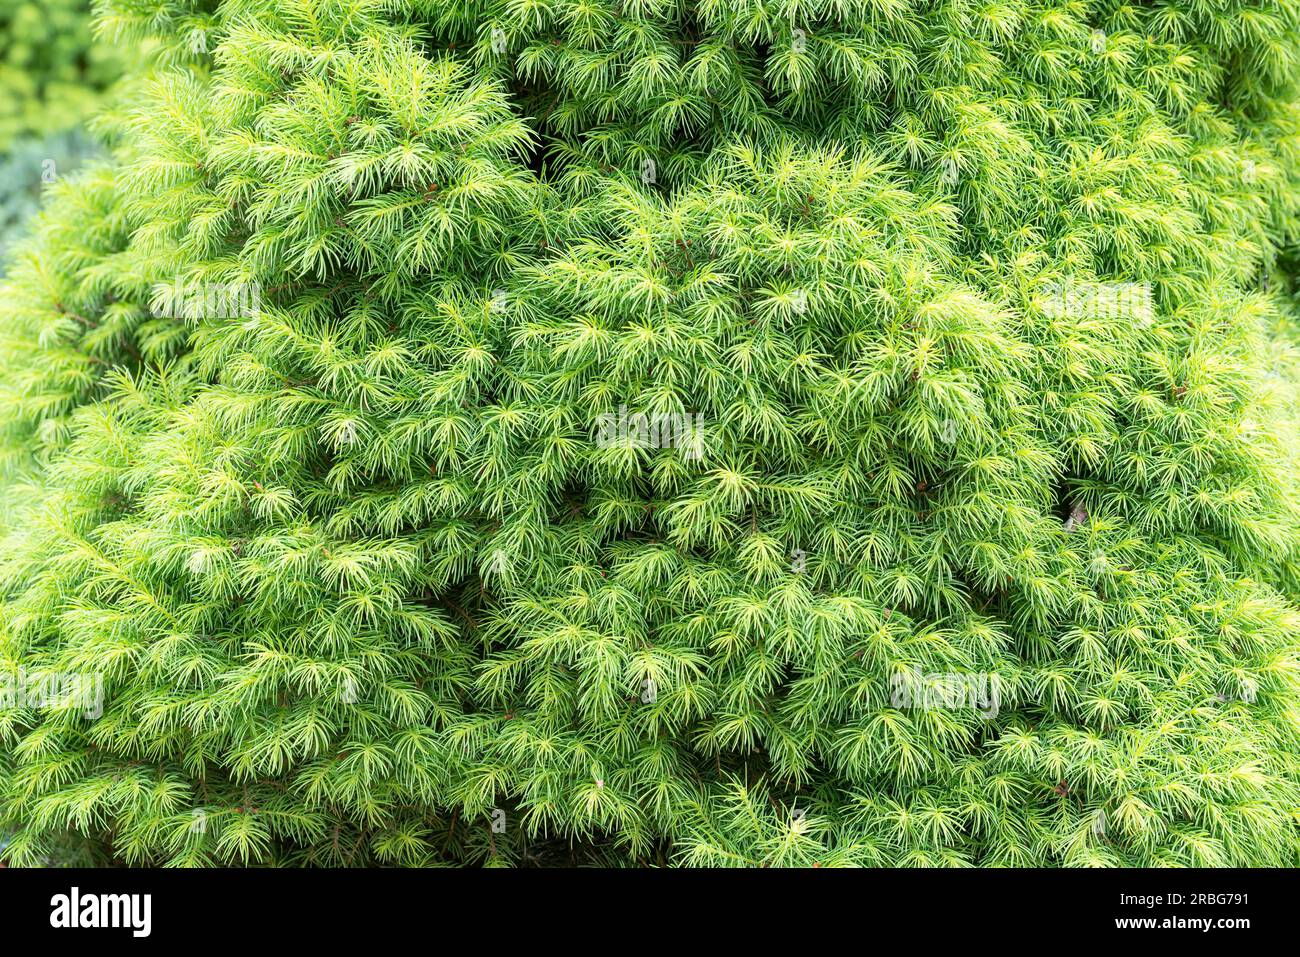 Close-up detail of a young (Picea Abies) Nidiformis with fresh sprouts in spring, appearing as a texture or background Stock Photo